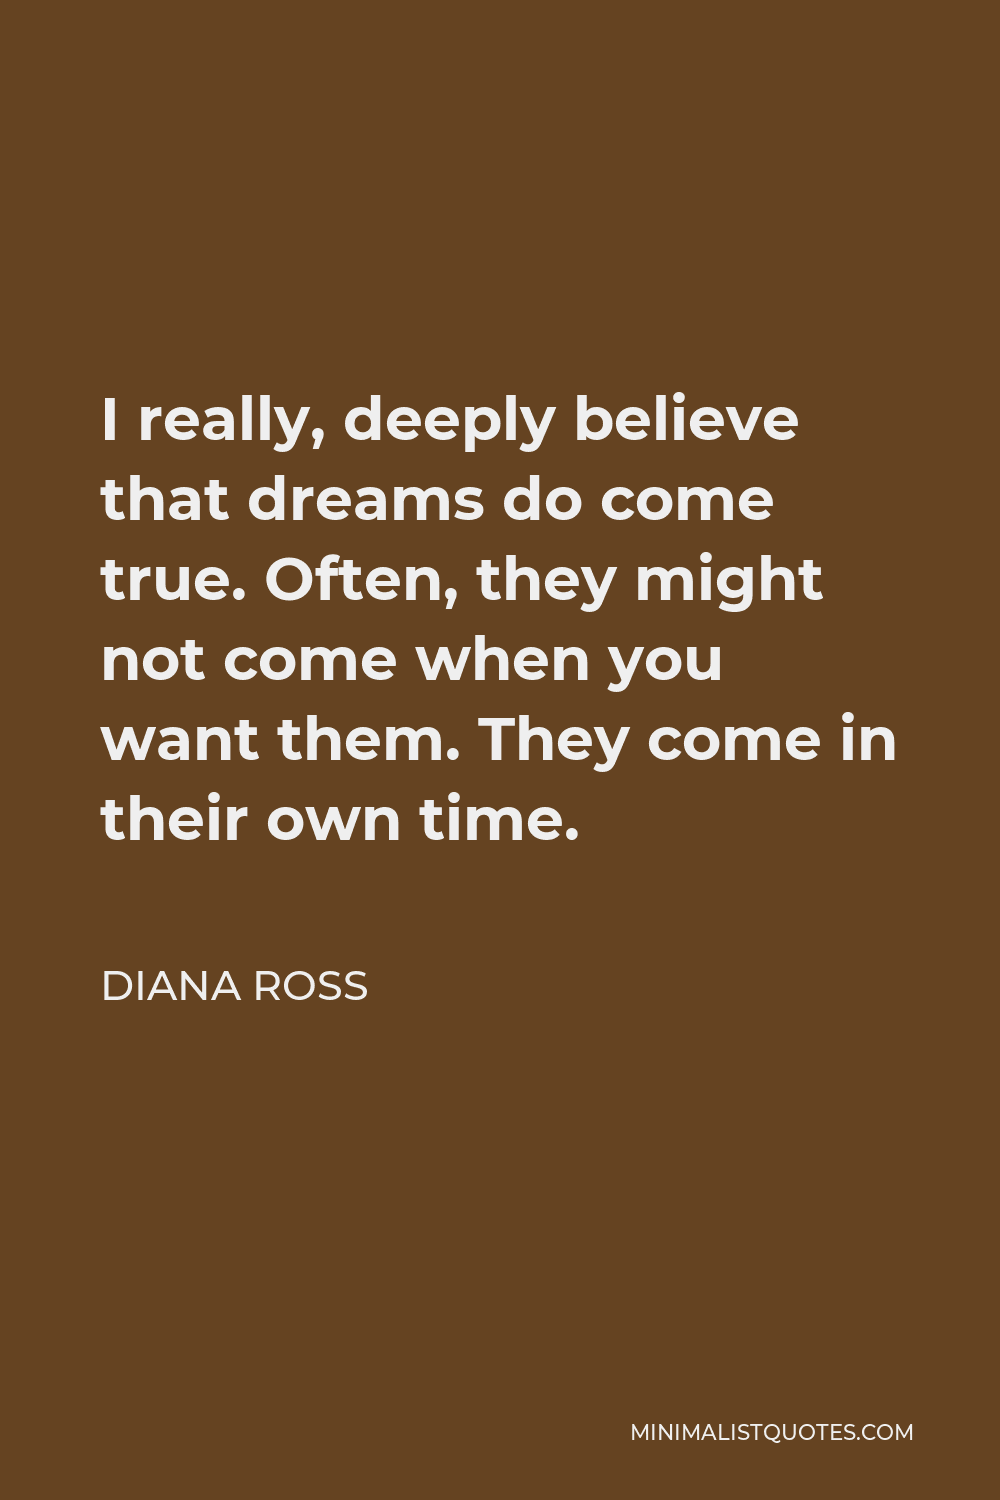 Diana Ross Quote - I really, deeply believe that dreams do come true. Often, they might not come when you want them. They come in their own time.